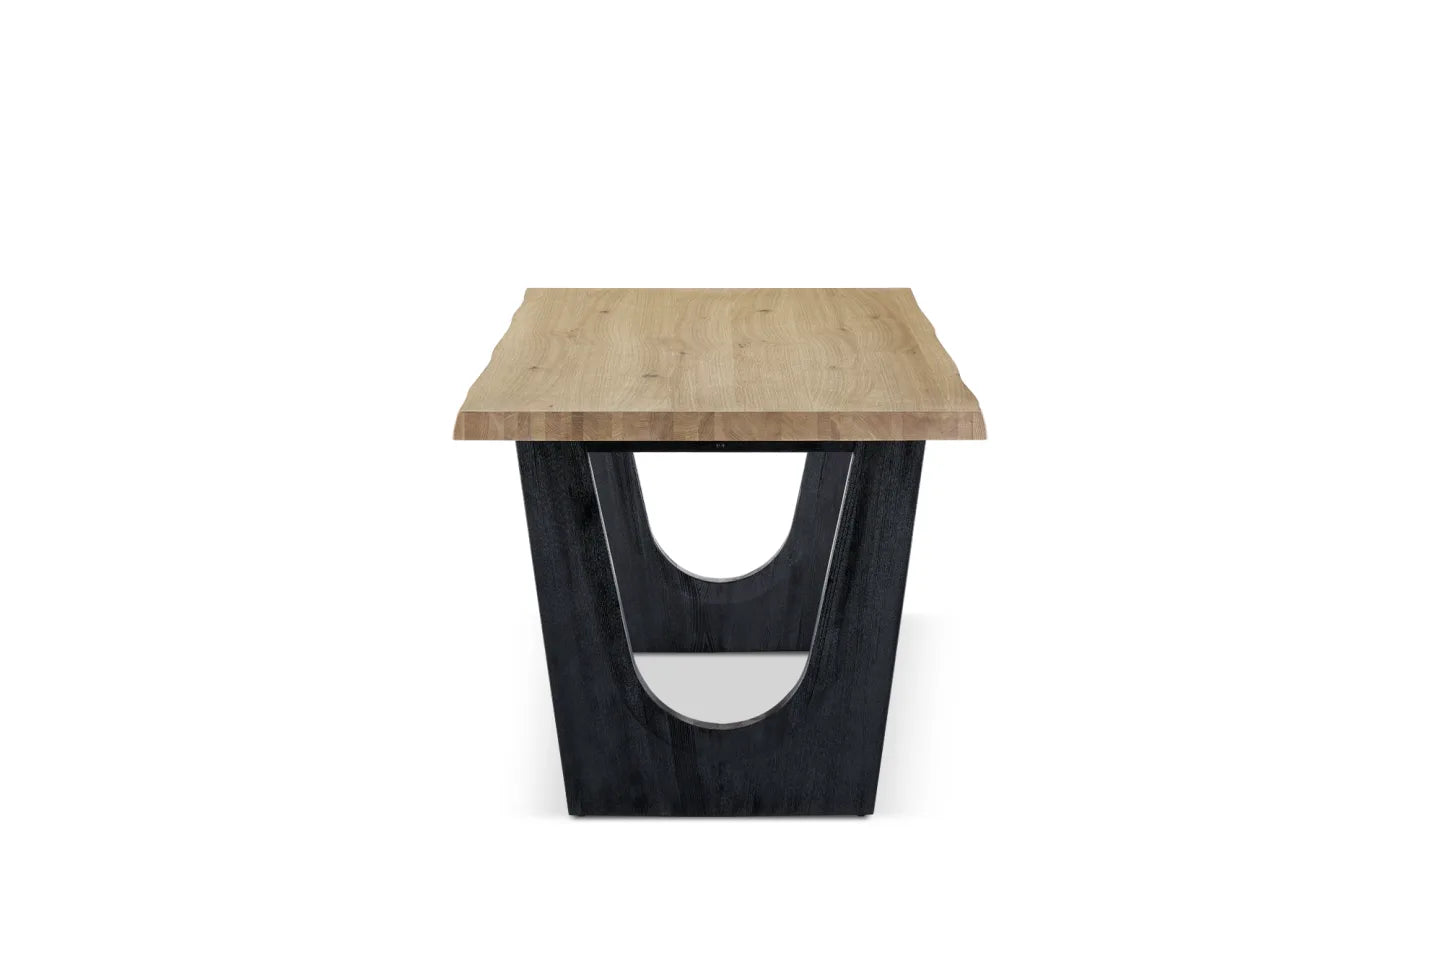 Sawyer Dining Table